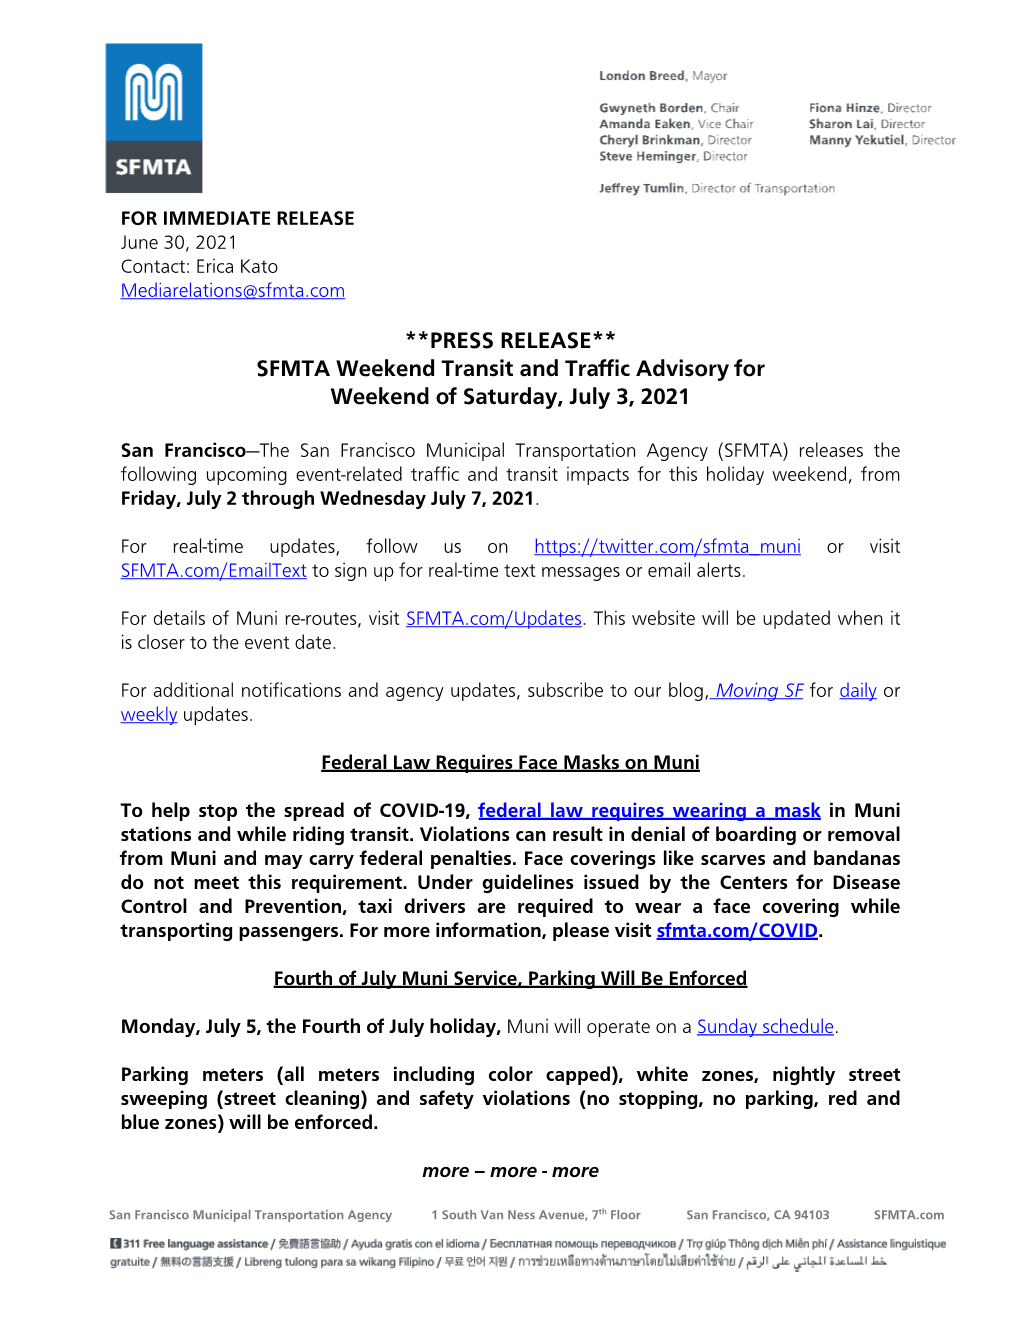 **PRESS RELEASE** SFMTA Weekend Transit and Traffic Advisory for Weekend of Saturday, July 3, 2021